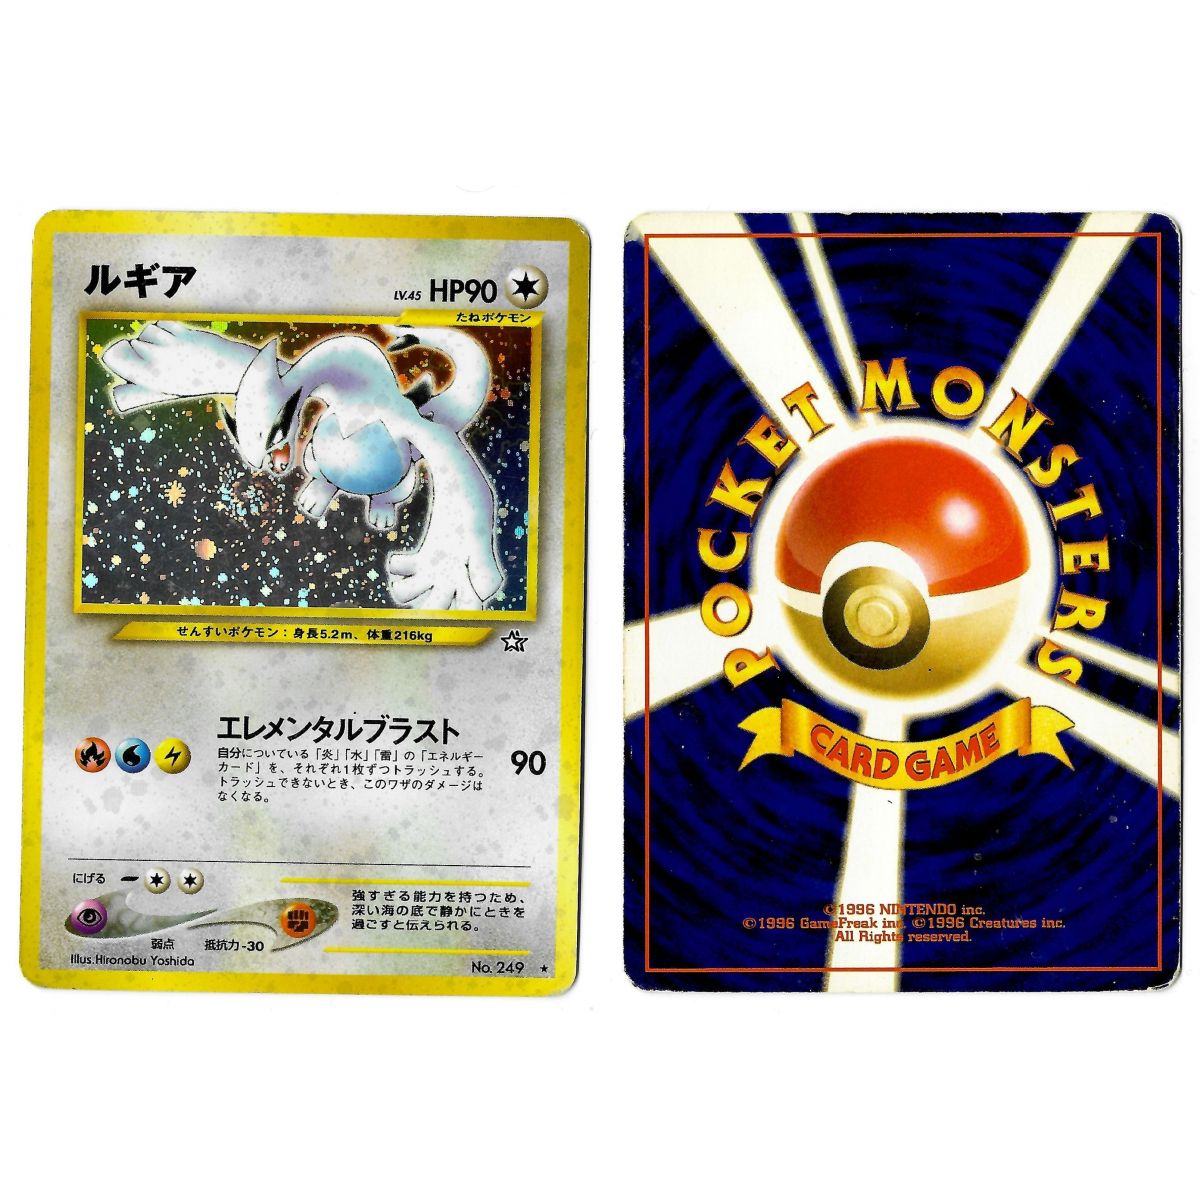 Item Lugia (6) No.249 Gold, Silver, to a New World... N1 Holo Unlimited Japonais Voir Scan